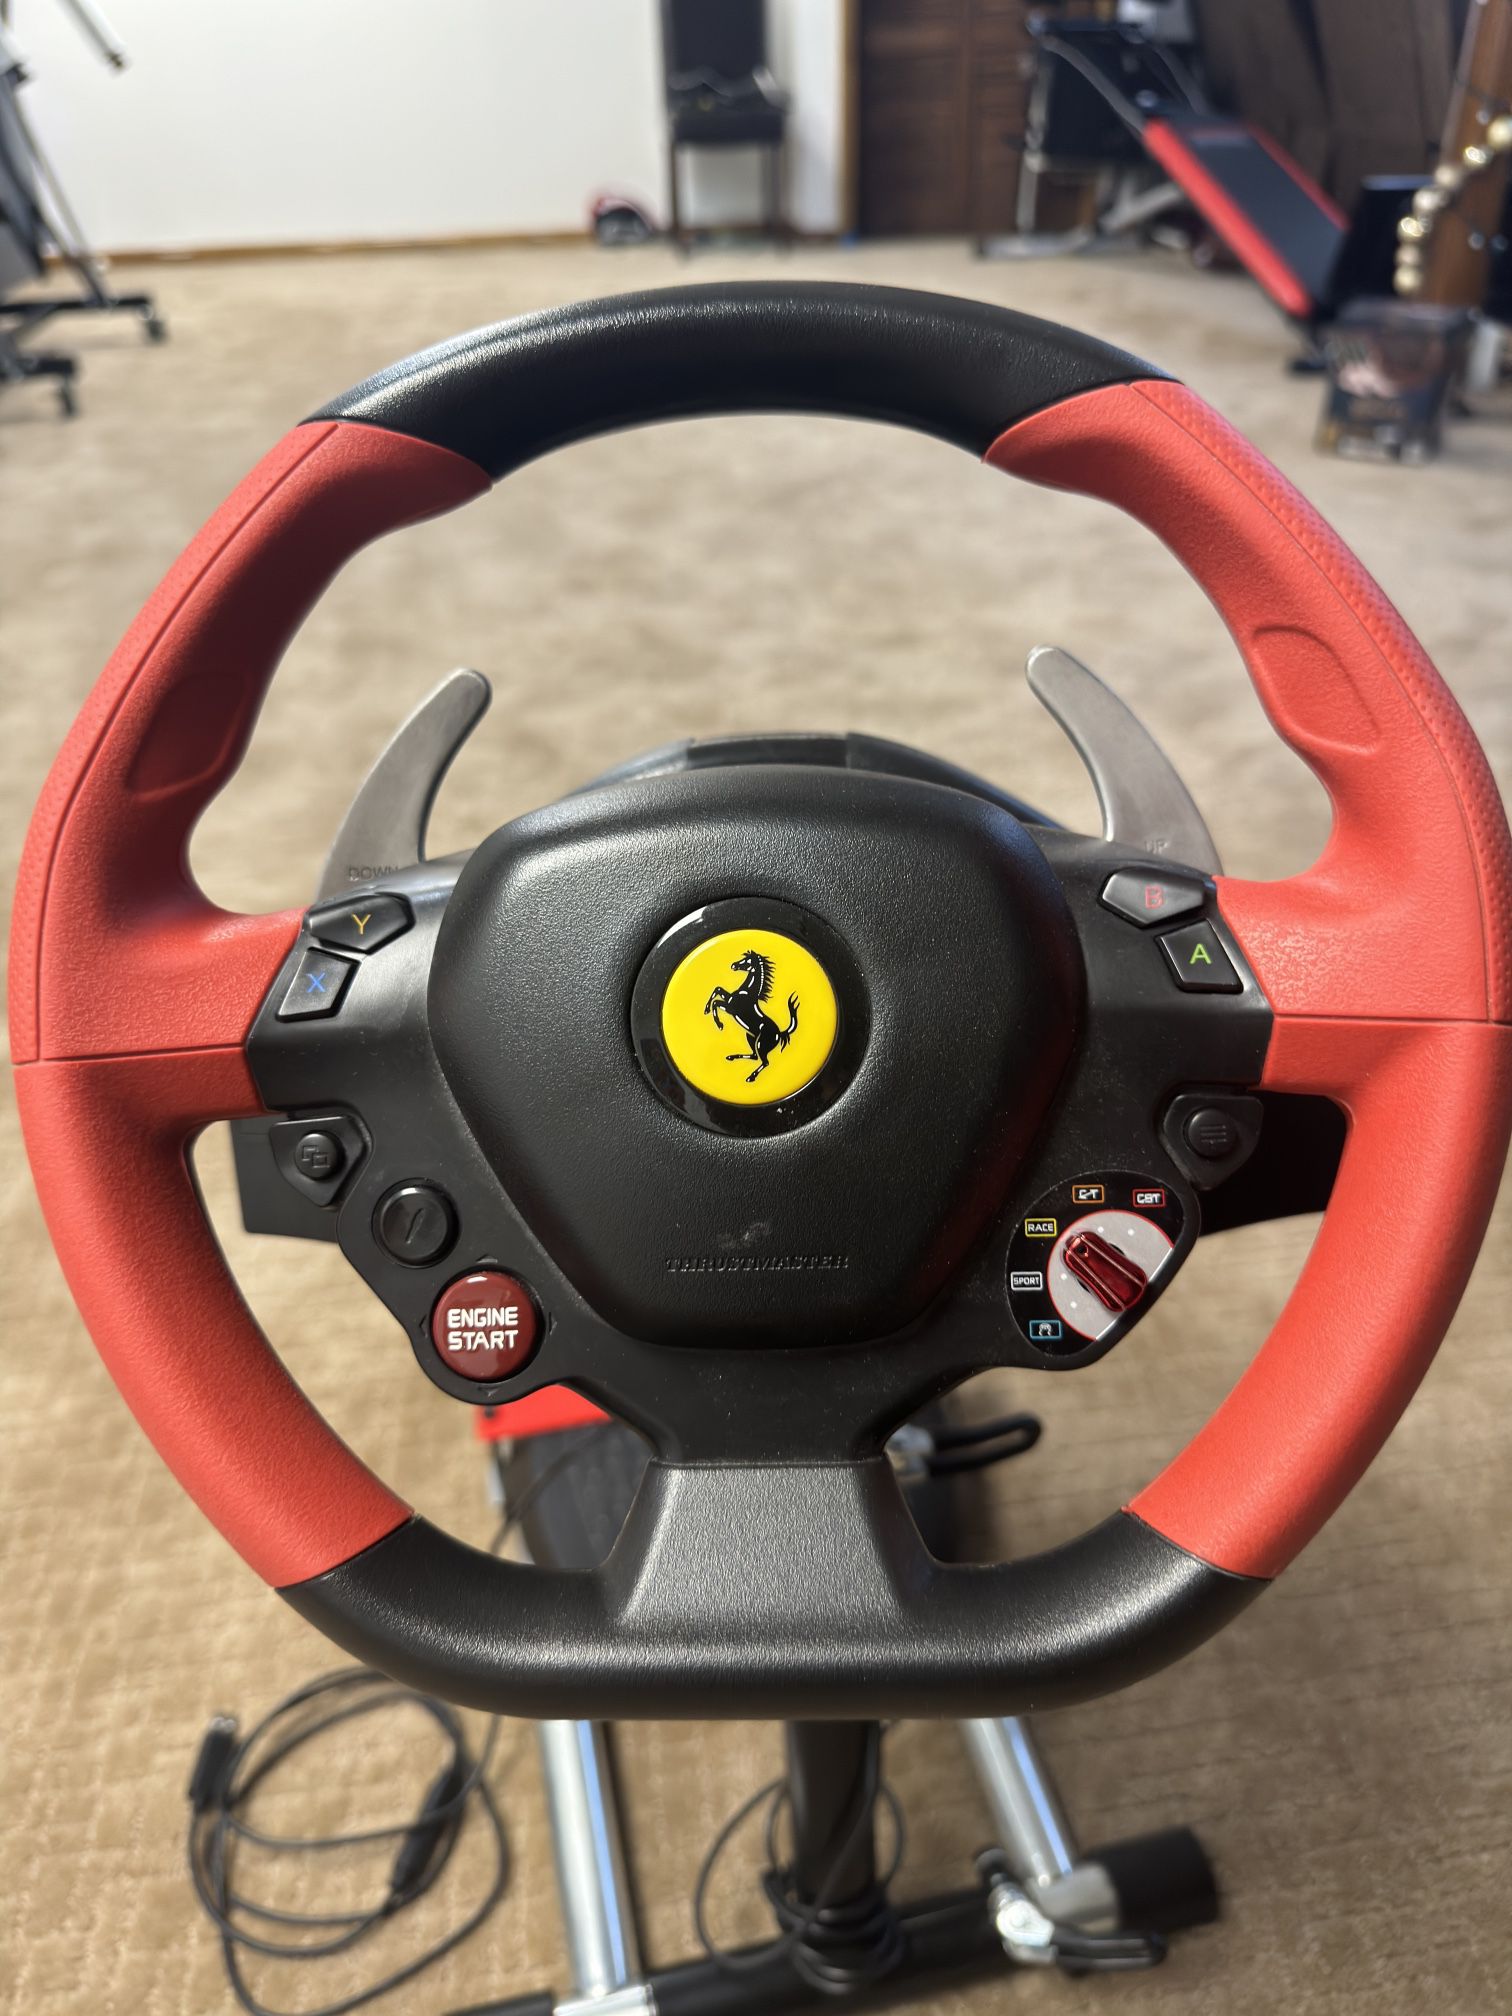 Ferrari 458 Steering Wheel For Xbox, Stand is included.